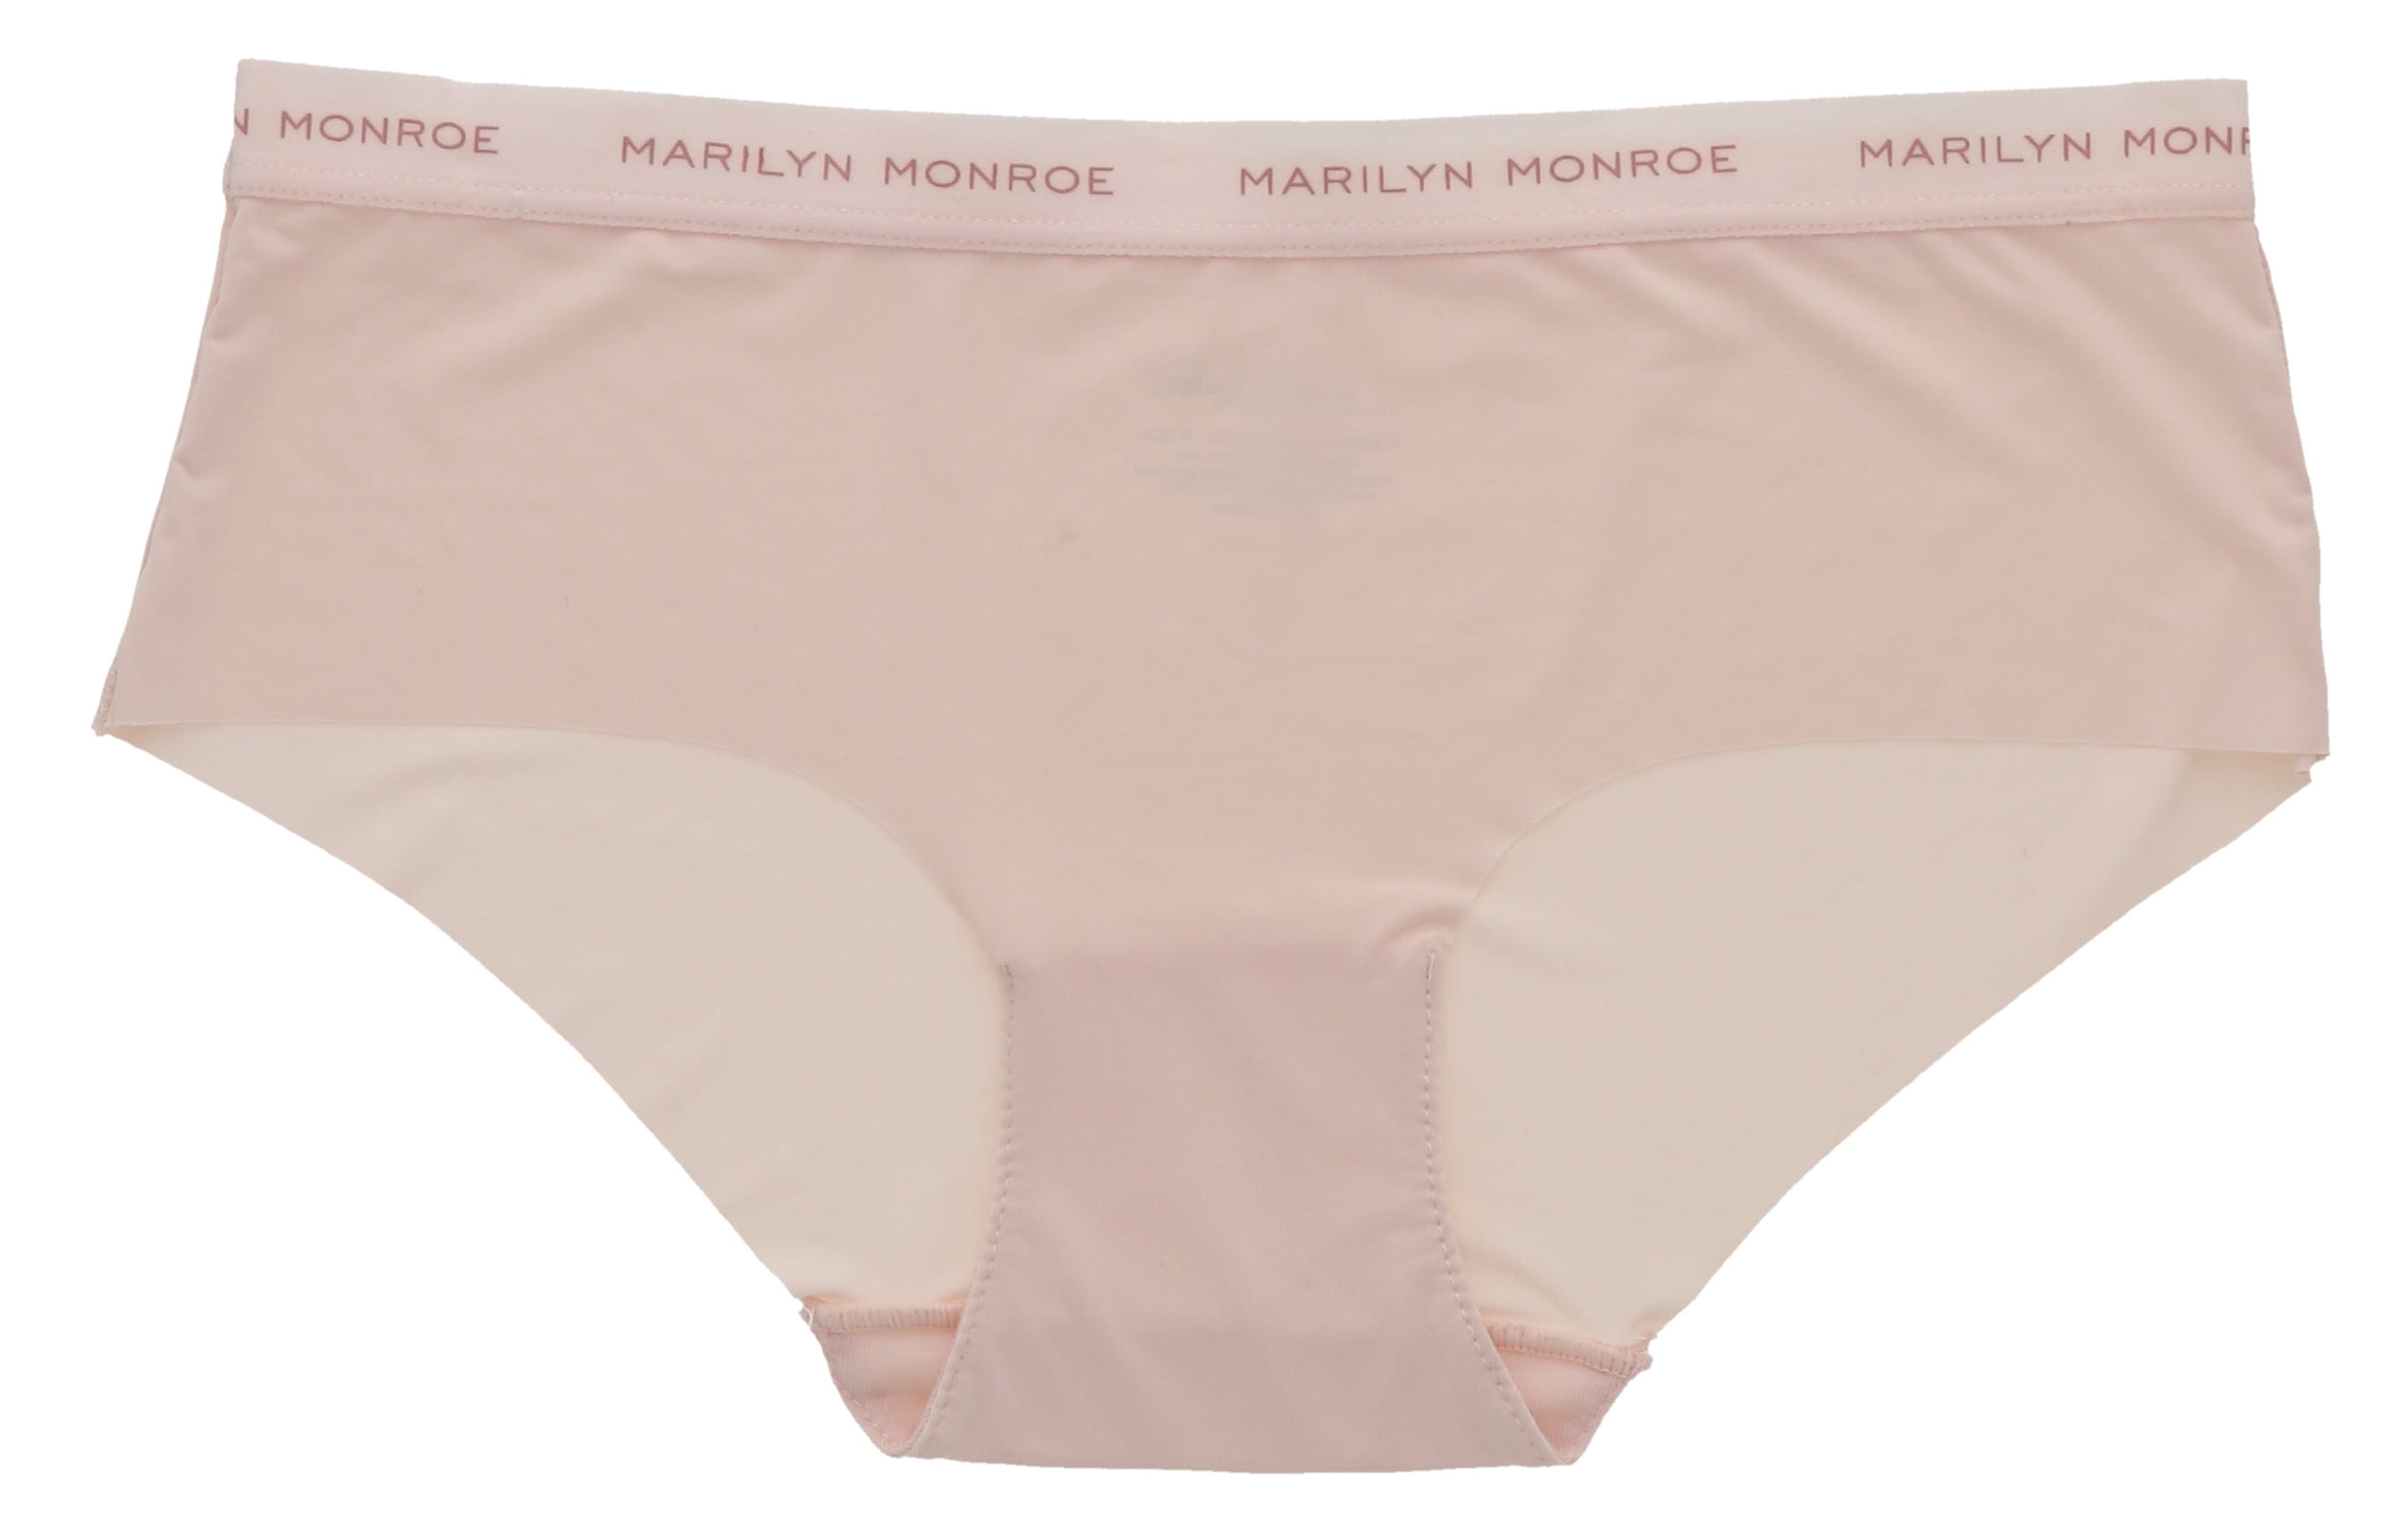 Marilyn Monroe Women's Sexy Lace Hipster Brief Panties 5 Pack - Vintage  Pink Coral Floral - Large 